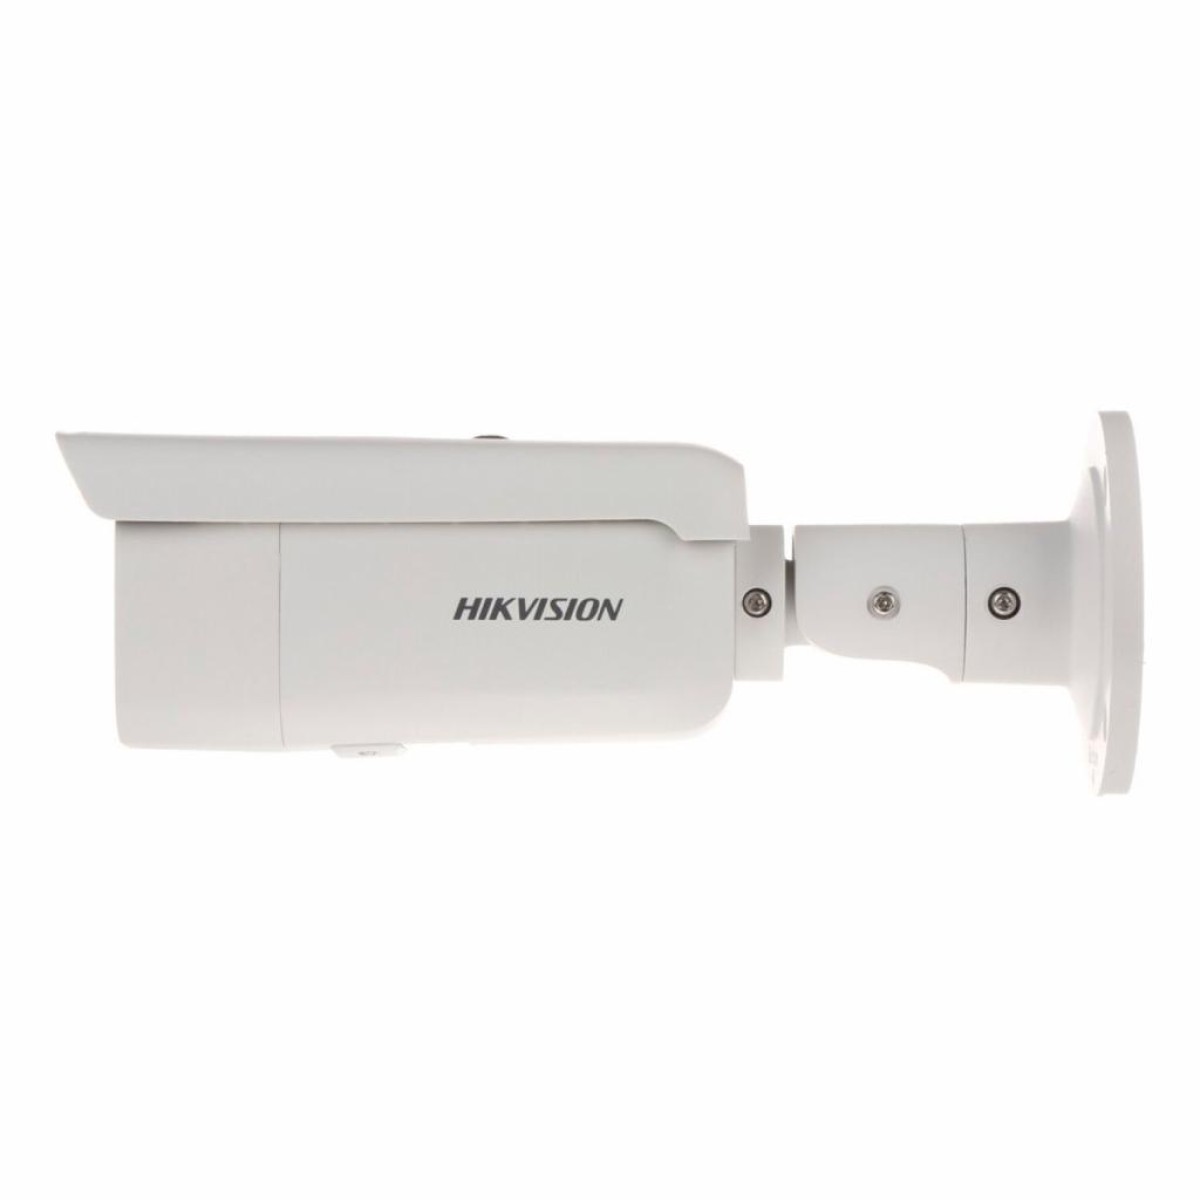 IP-камера Hikvision DS-2CD2T85G1-I8 (4.0) 98_98.jpg - фото 3